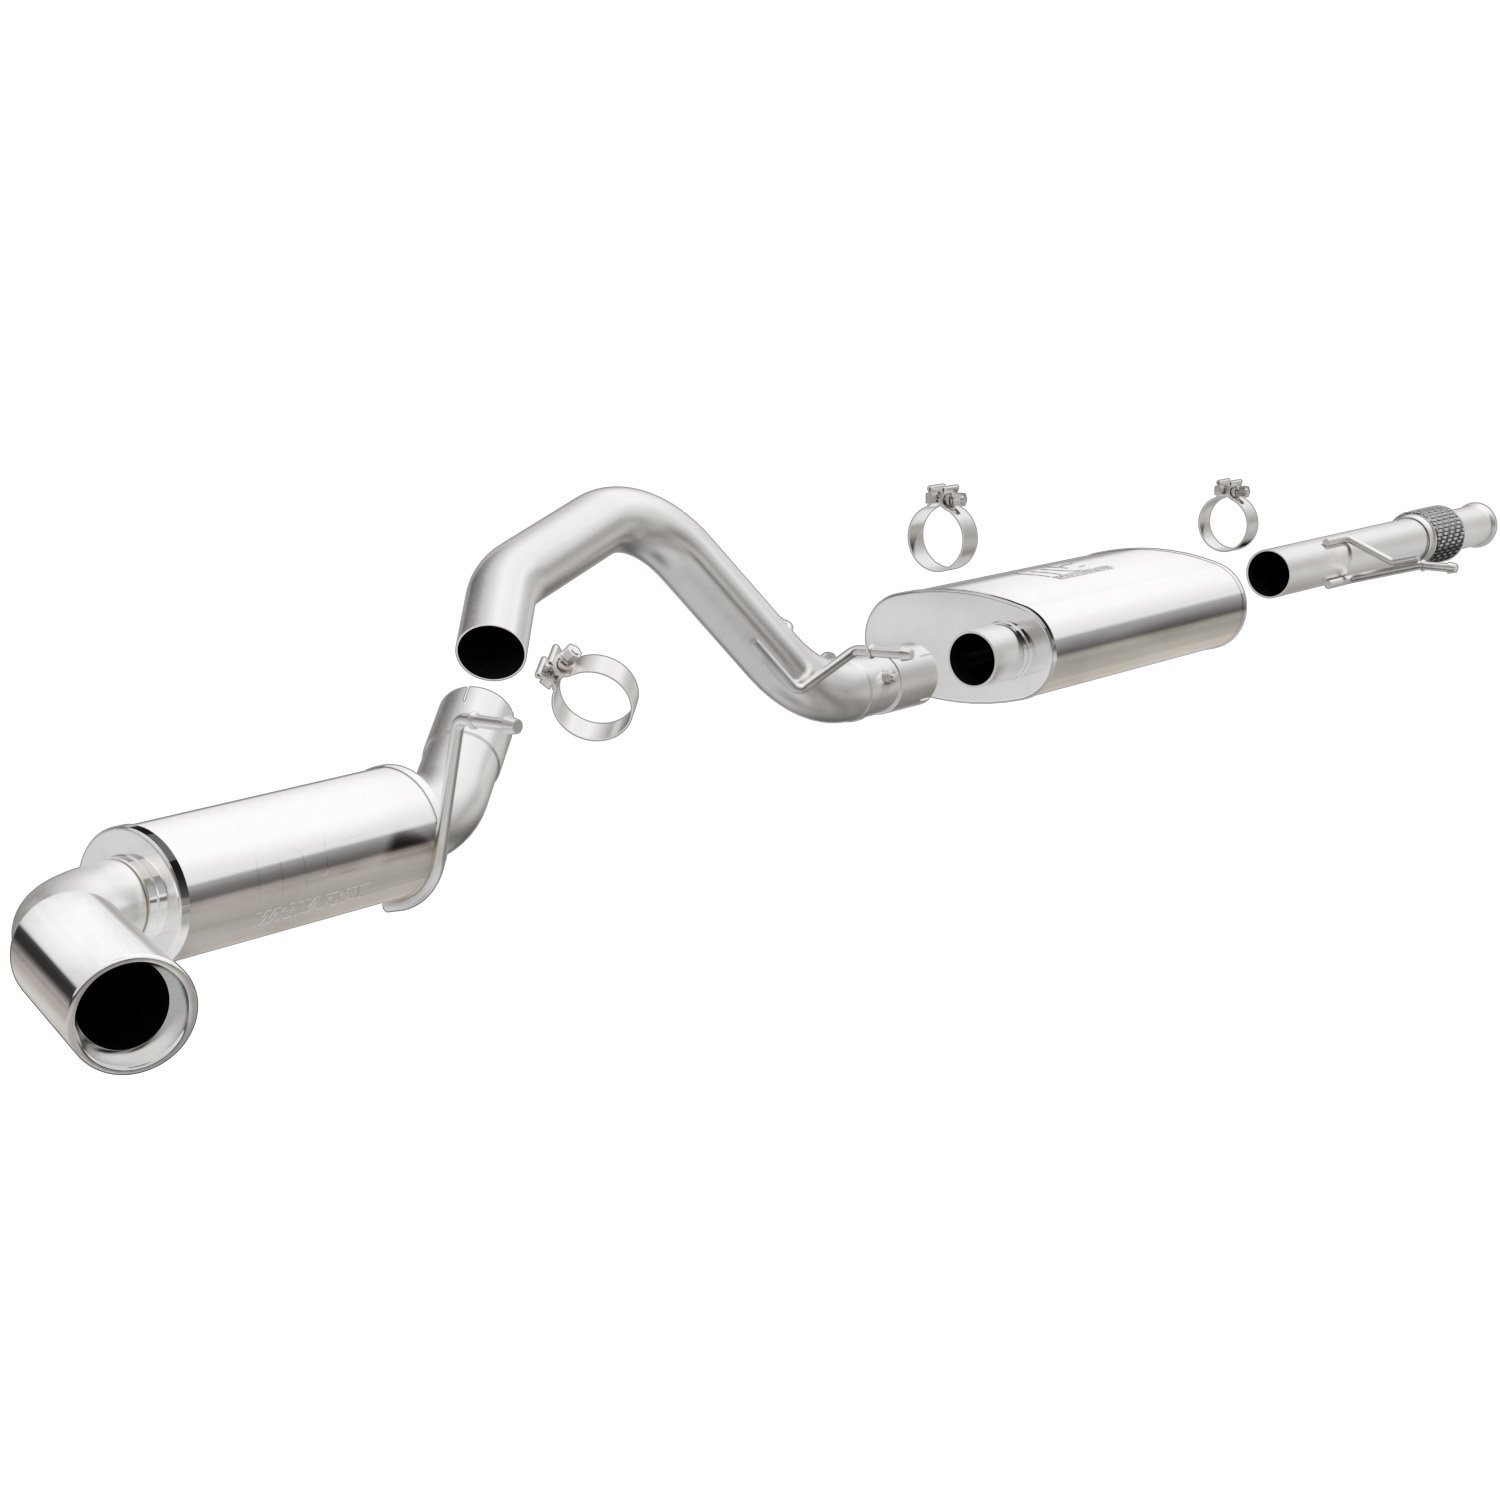 MF Series Cat-Back Exhaust System 2015-2019 Chevy Suburban 5.3L V8